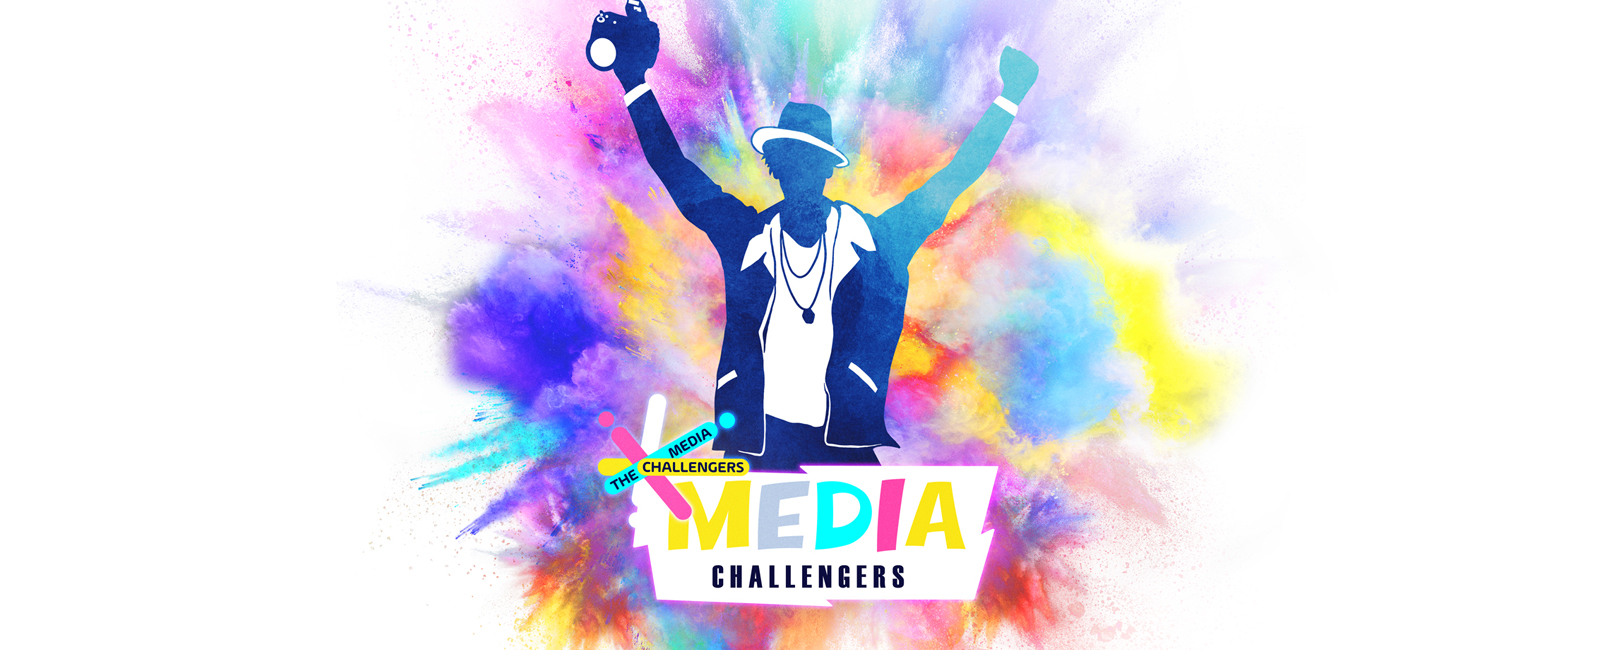 The Media Challengers